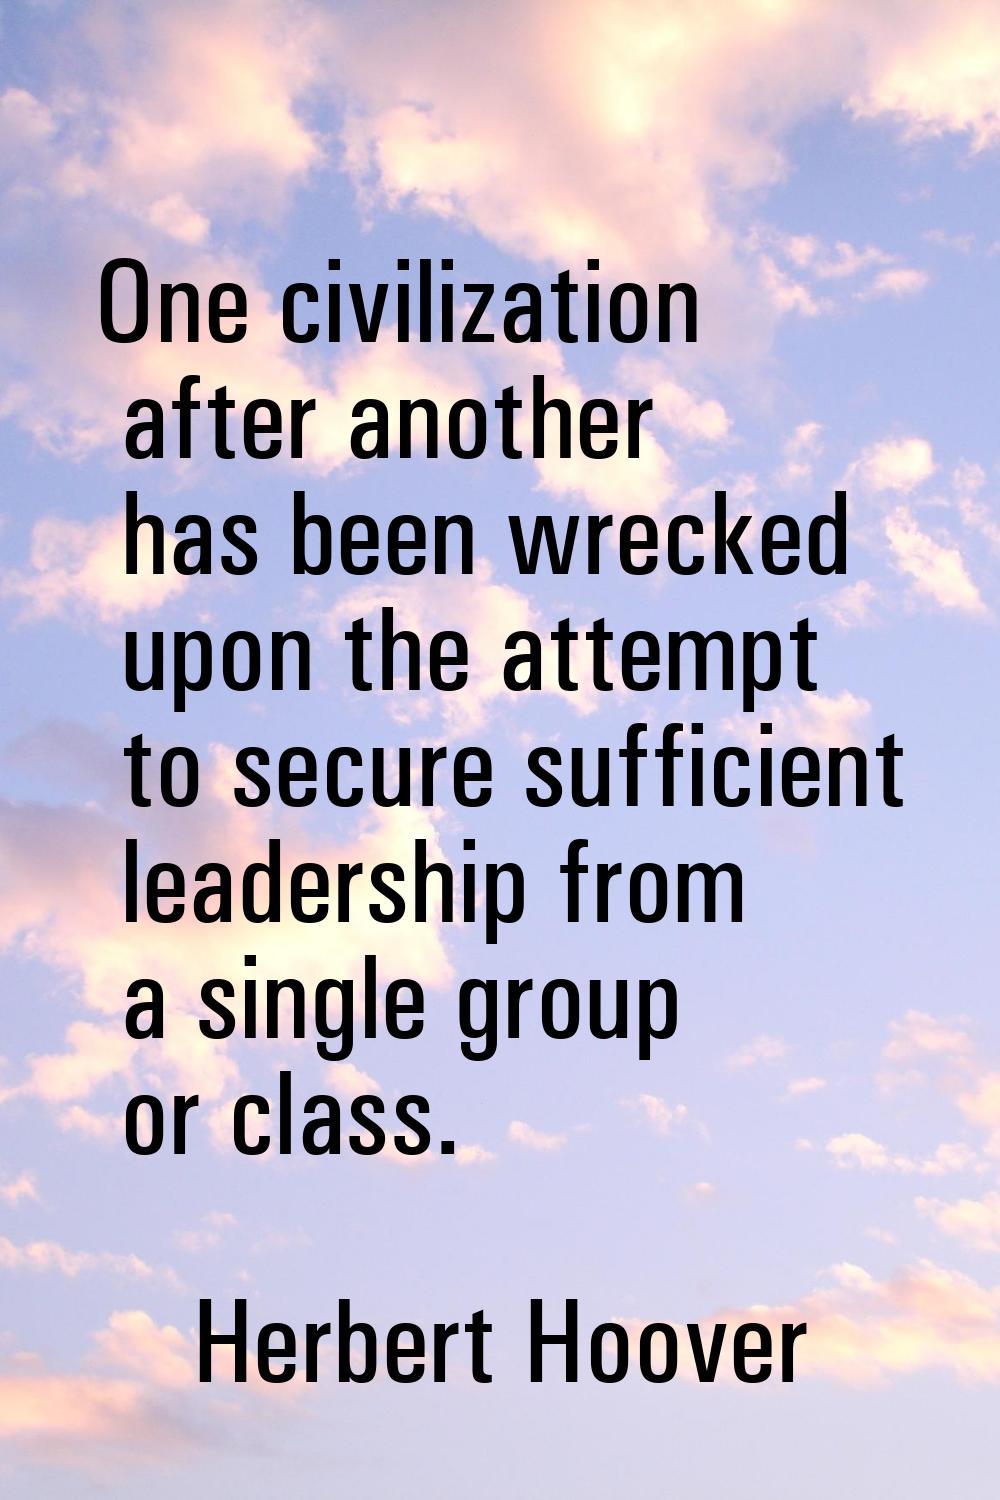 One civilization after another has been wrecked upon the attempt to secure sufficient leadership fr